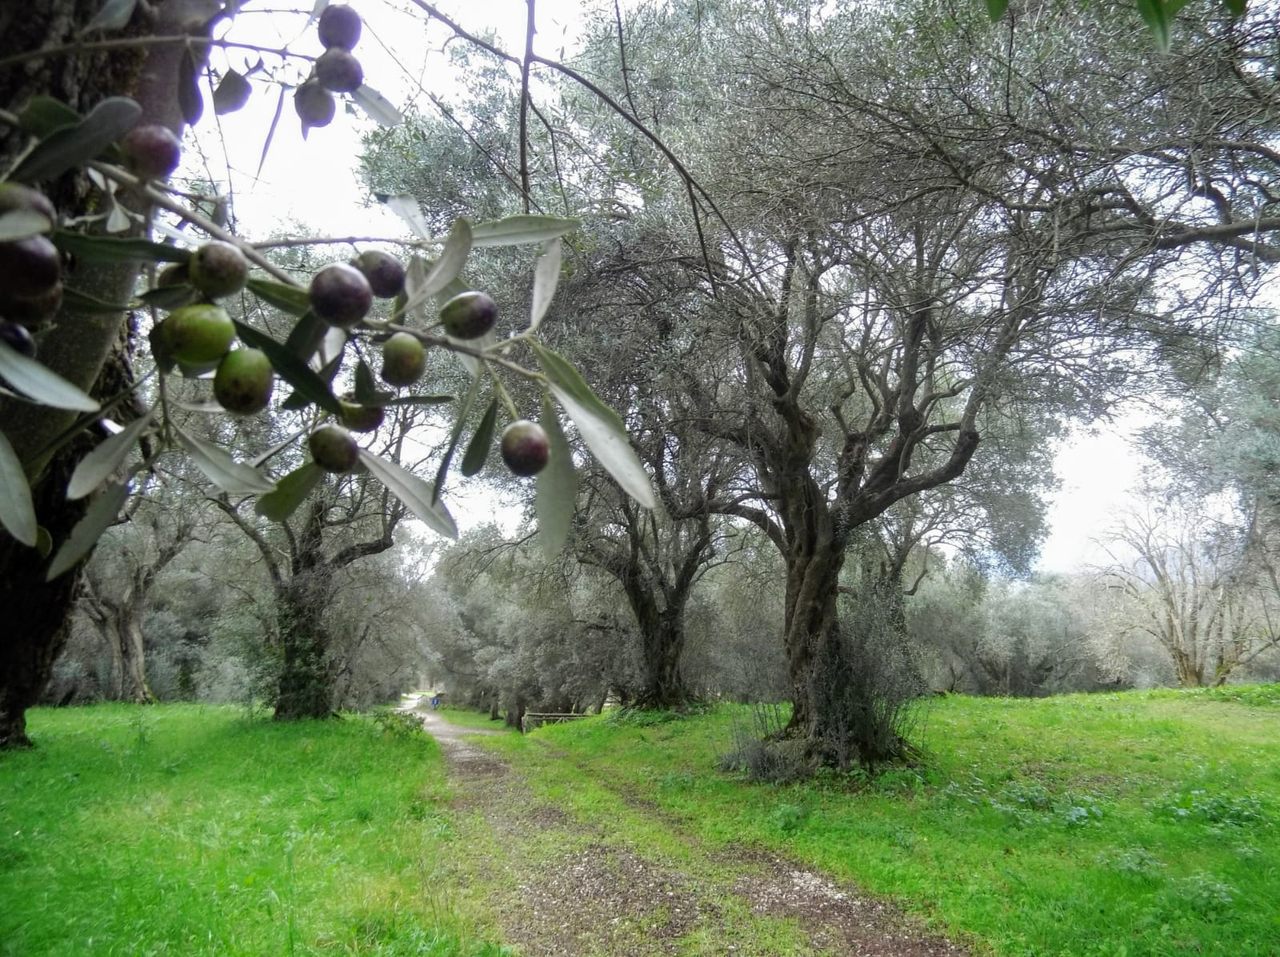 One of the olive trees at Hadrian’s Villa dates back to the 13th century.